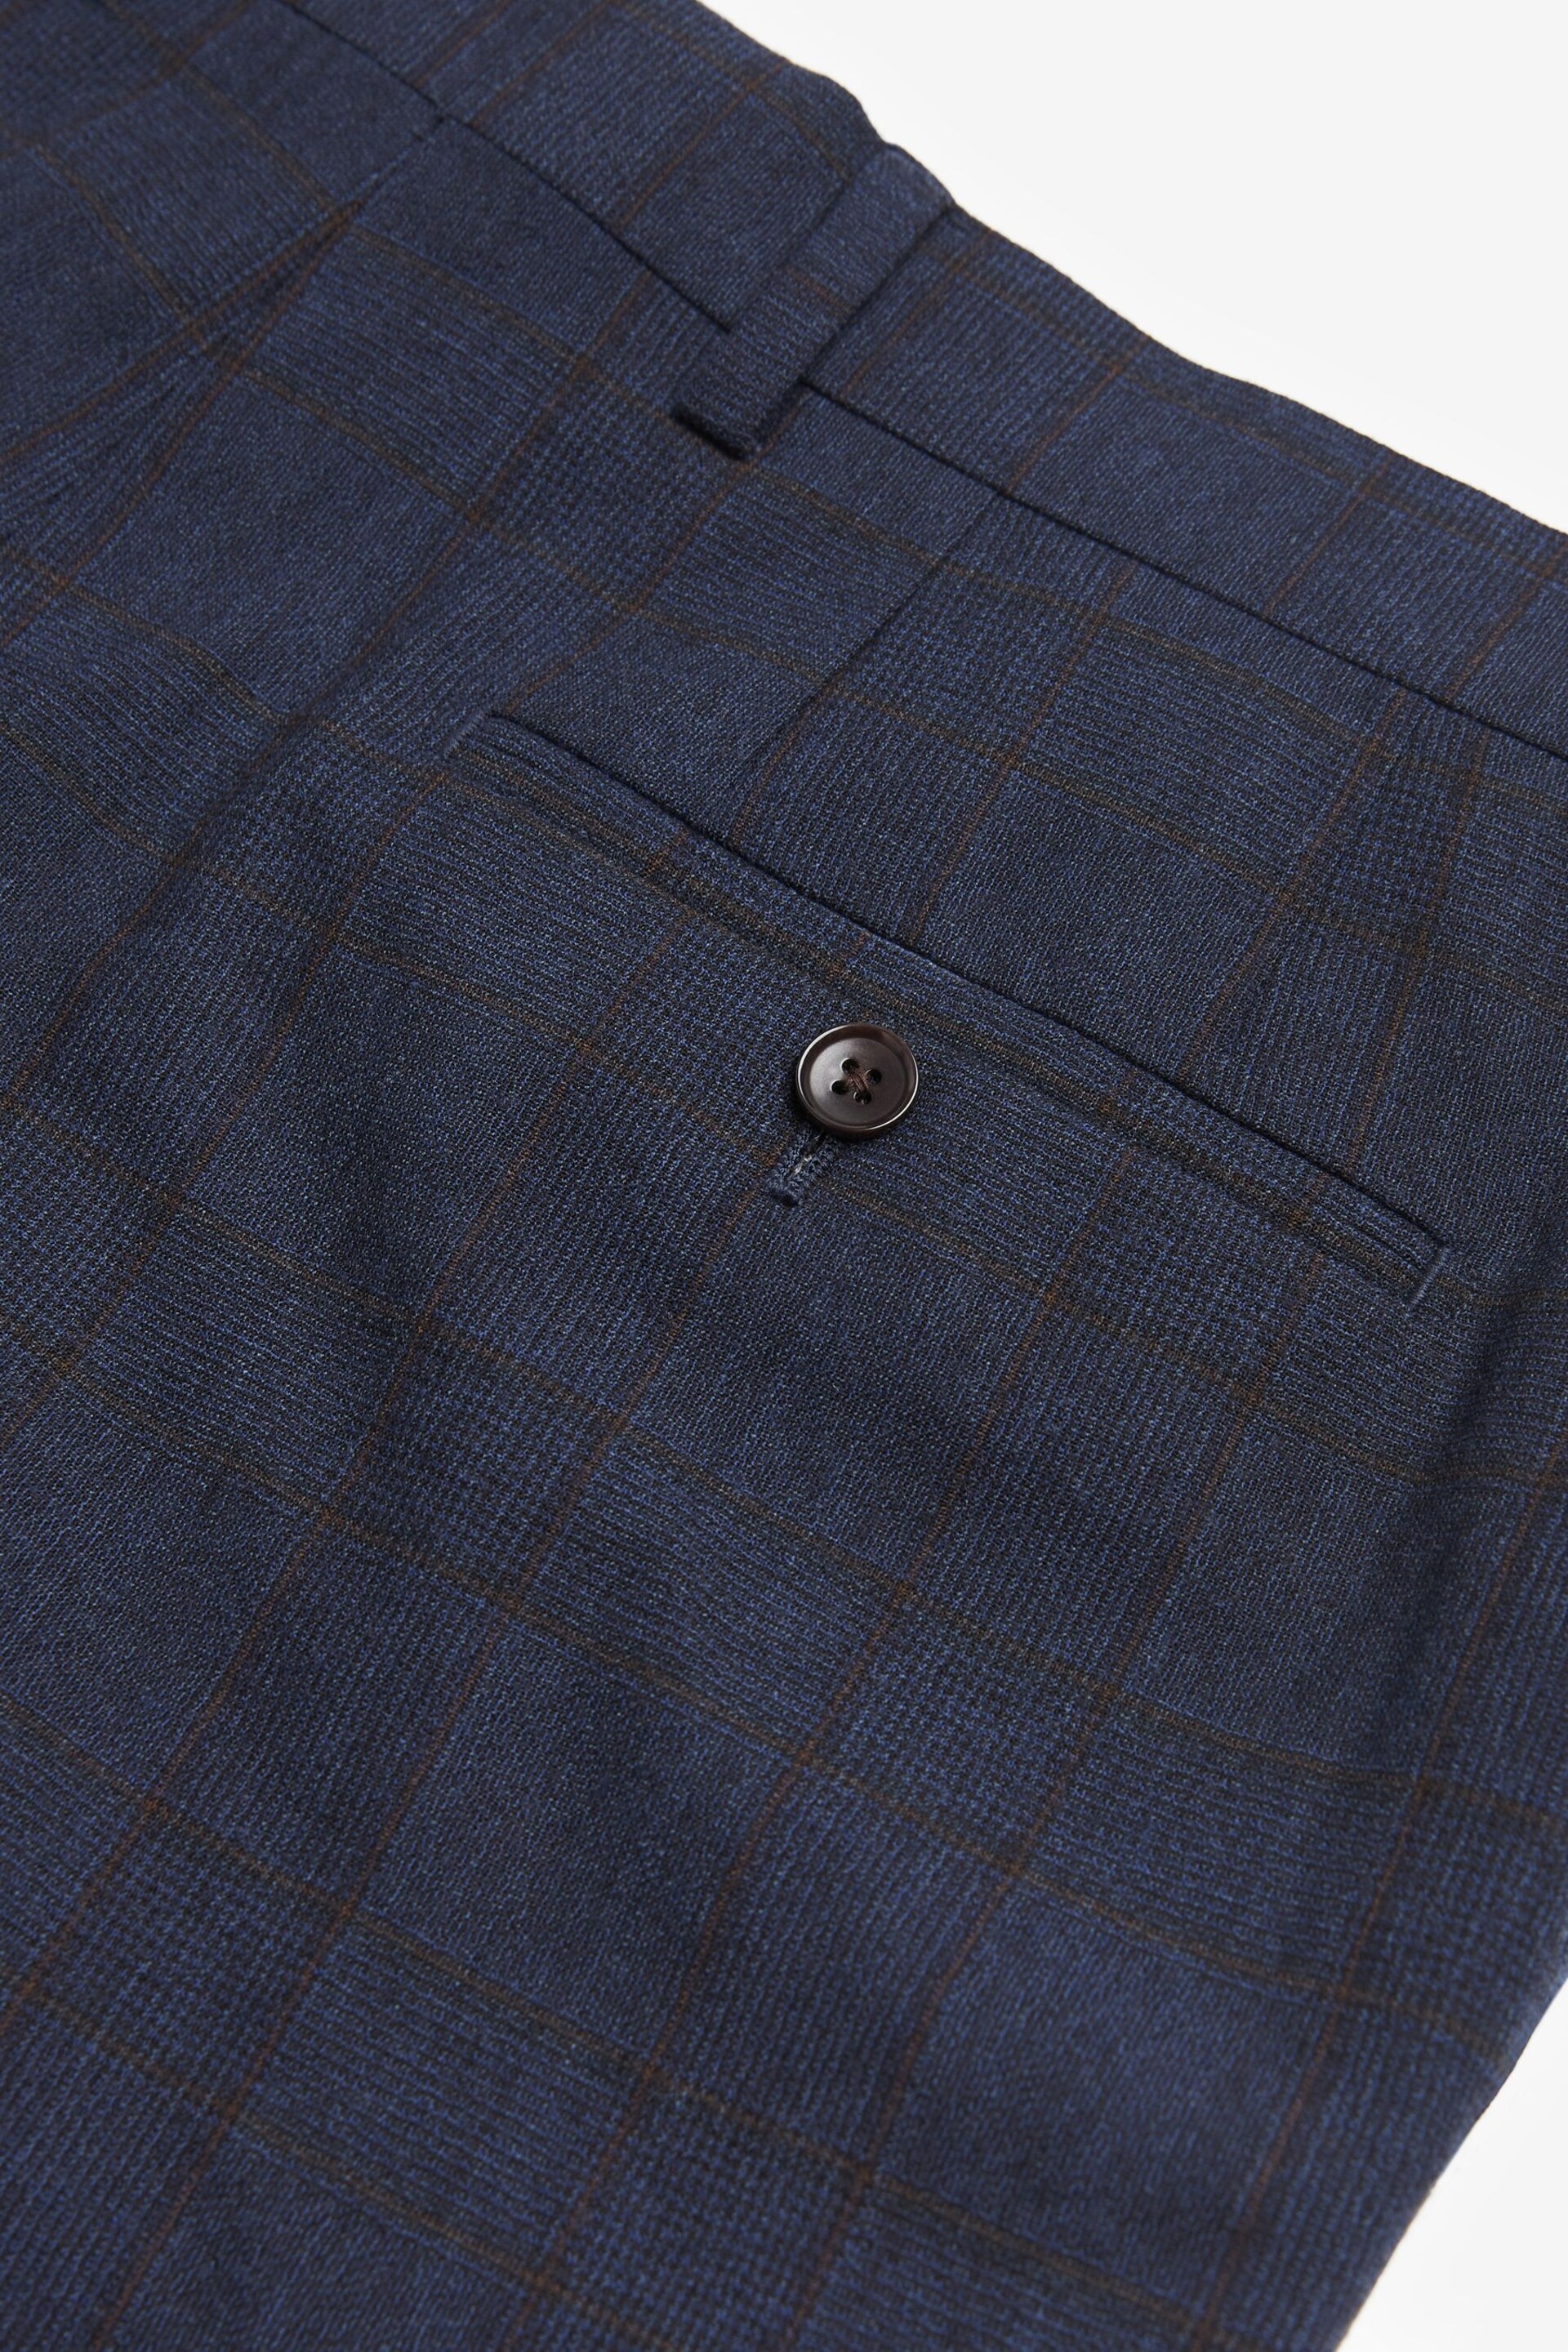 Navy Signature Italian Fabric Check Suit: Trousers - Image 9 of 12